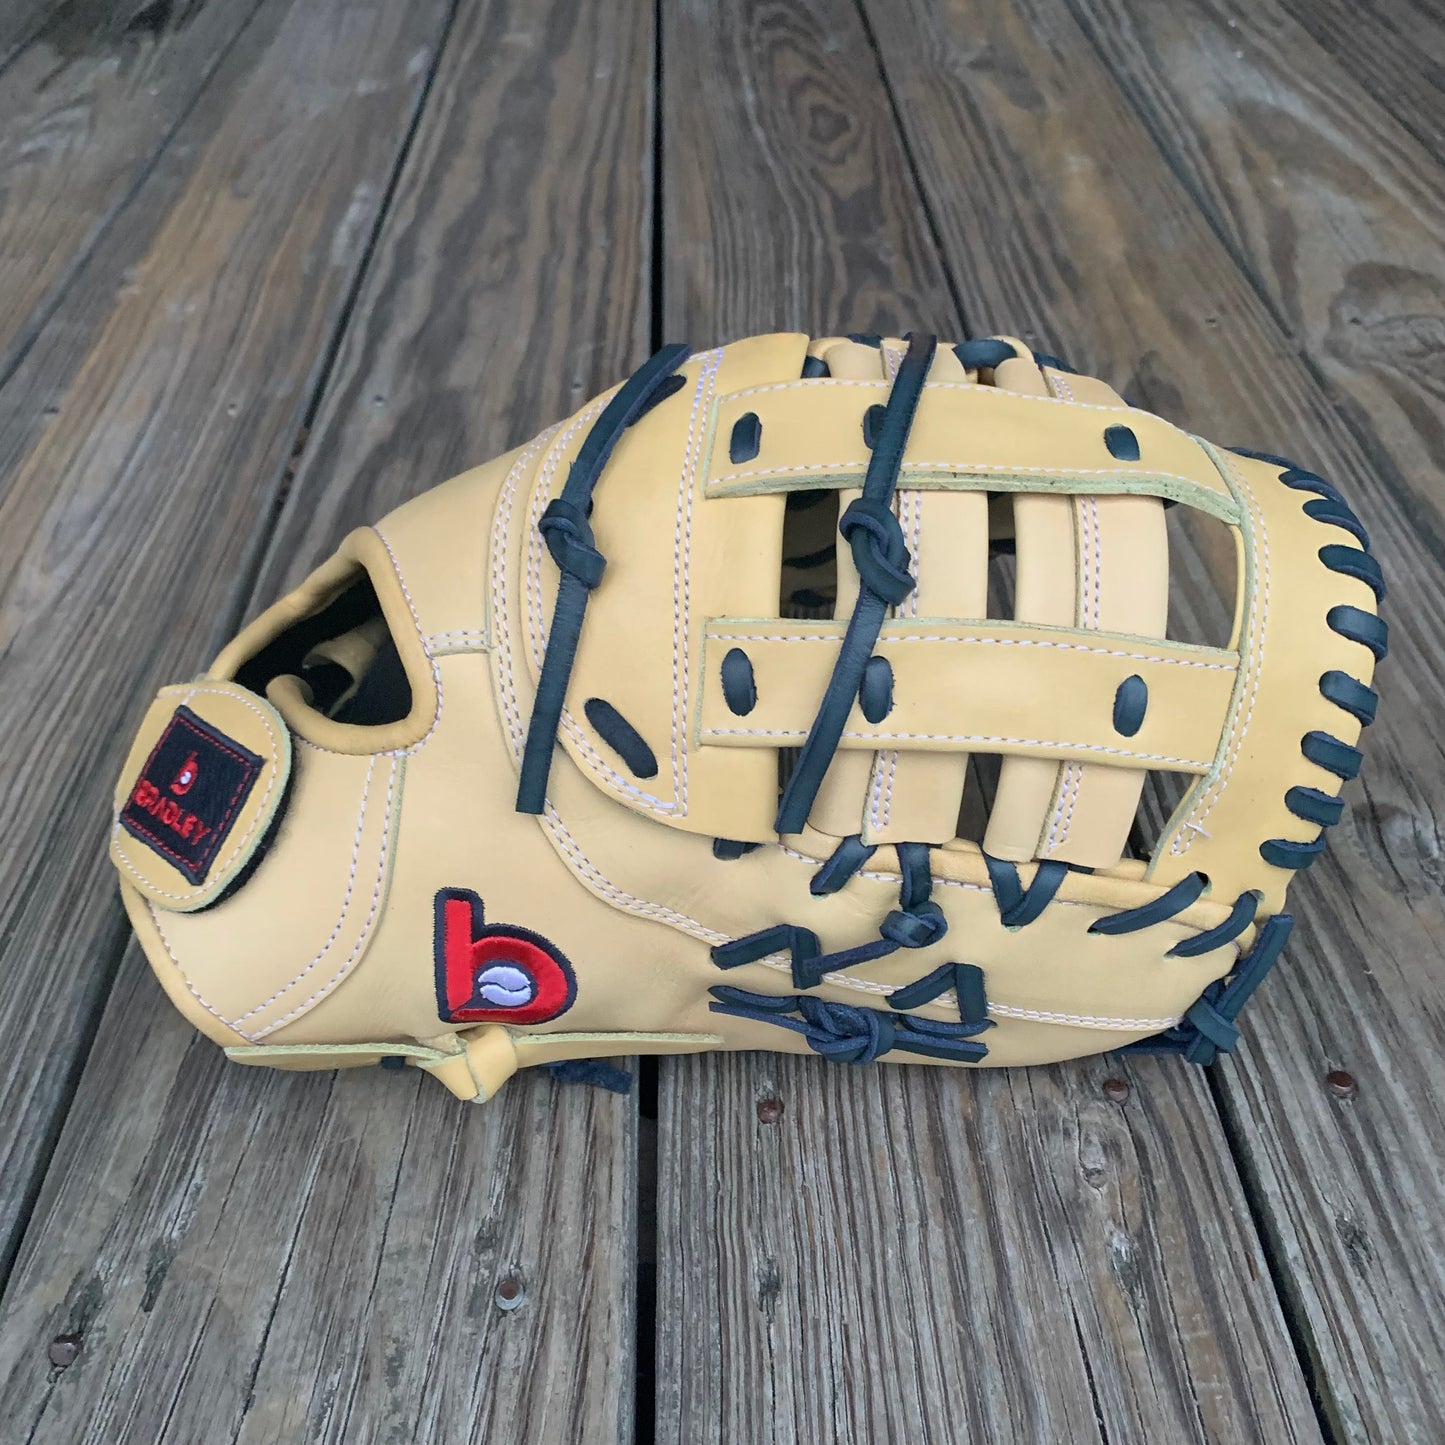 1B Mitt, Next Play Series 6.0 ADJ #-Web CLEARANCE, AUTOMATIC 20% OFF AT CHECKOUT